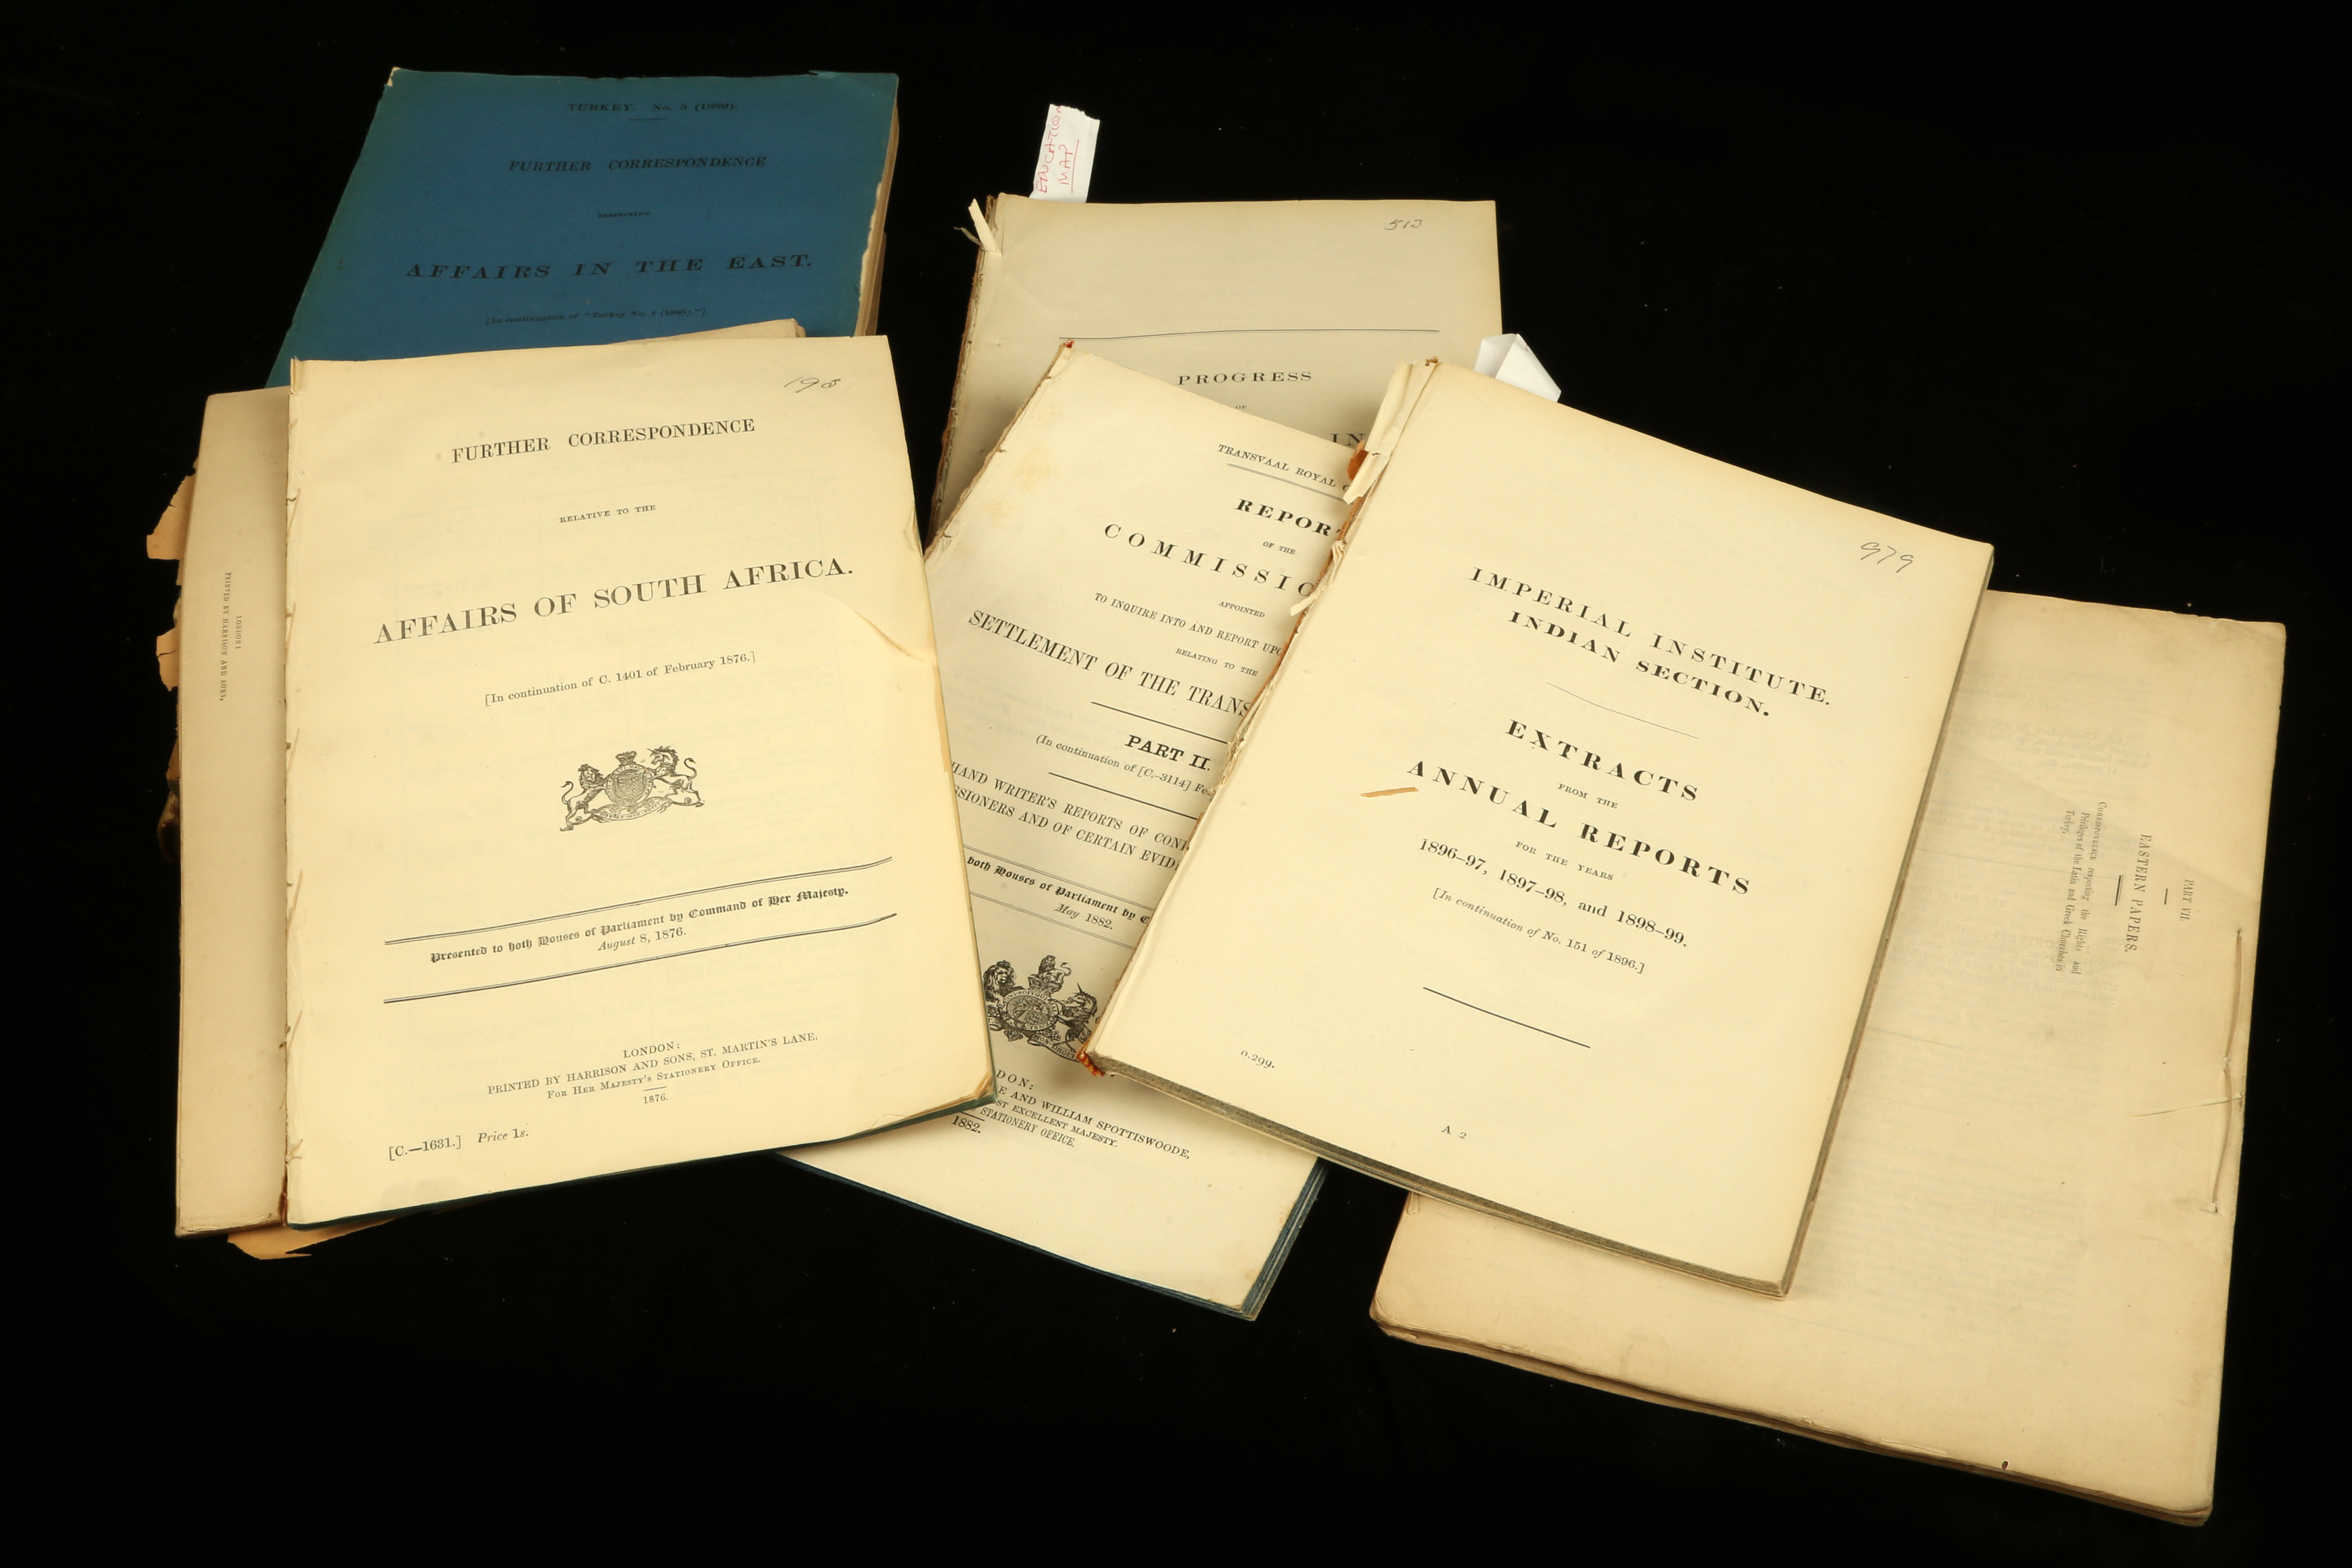 INDIA & SOUTH AFRICA - Statement of the Trade of British India with British Possessions and